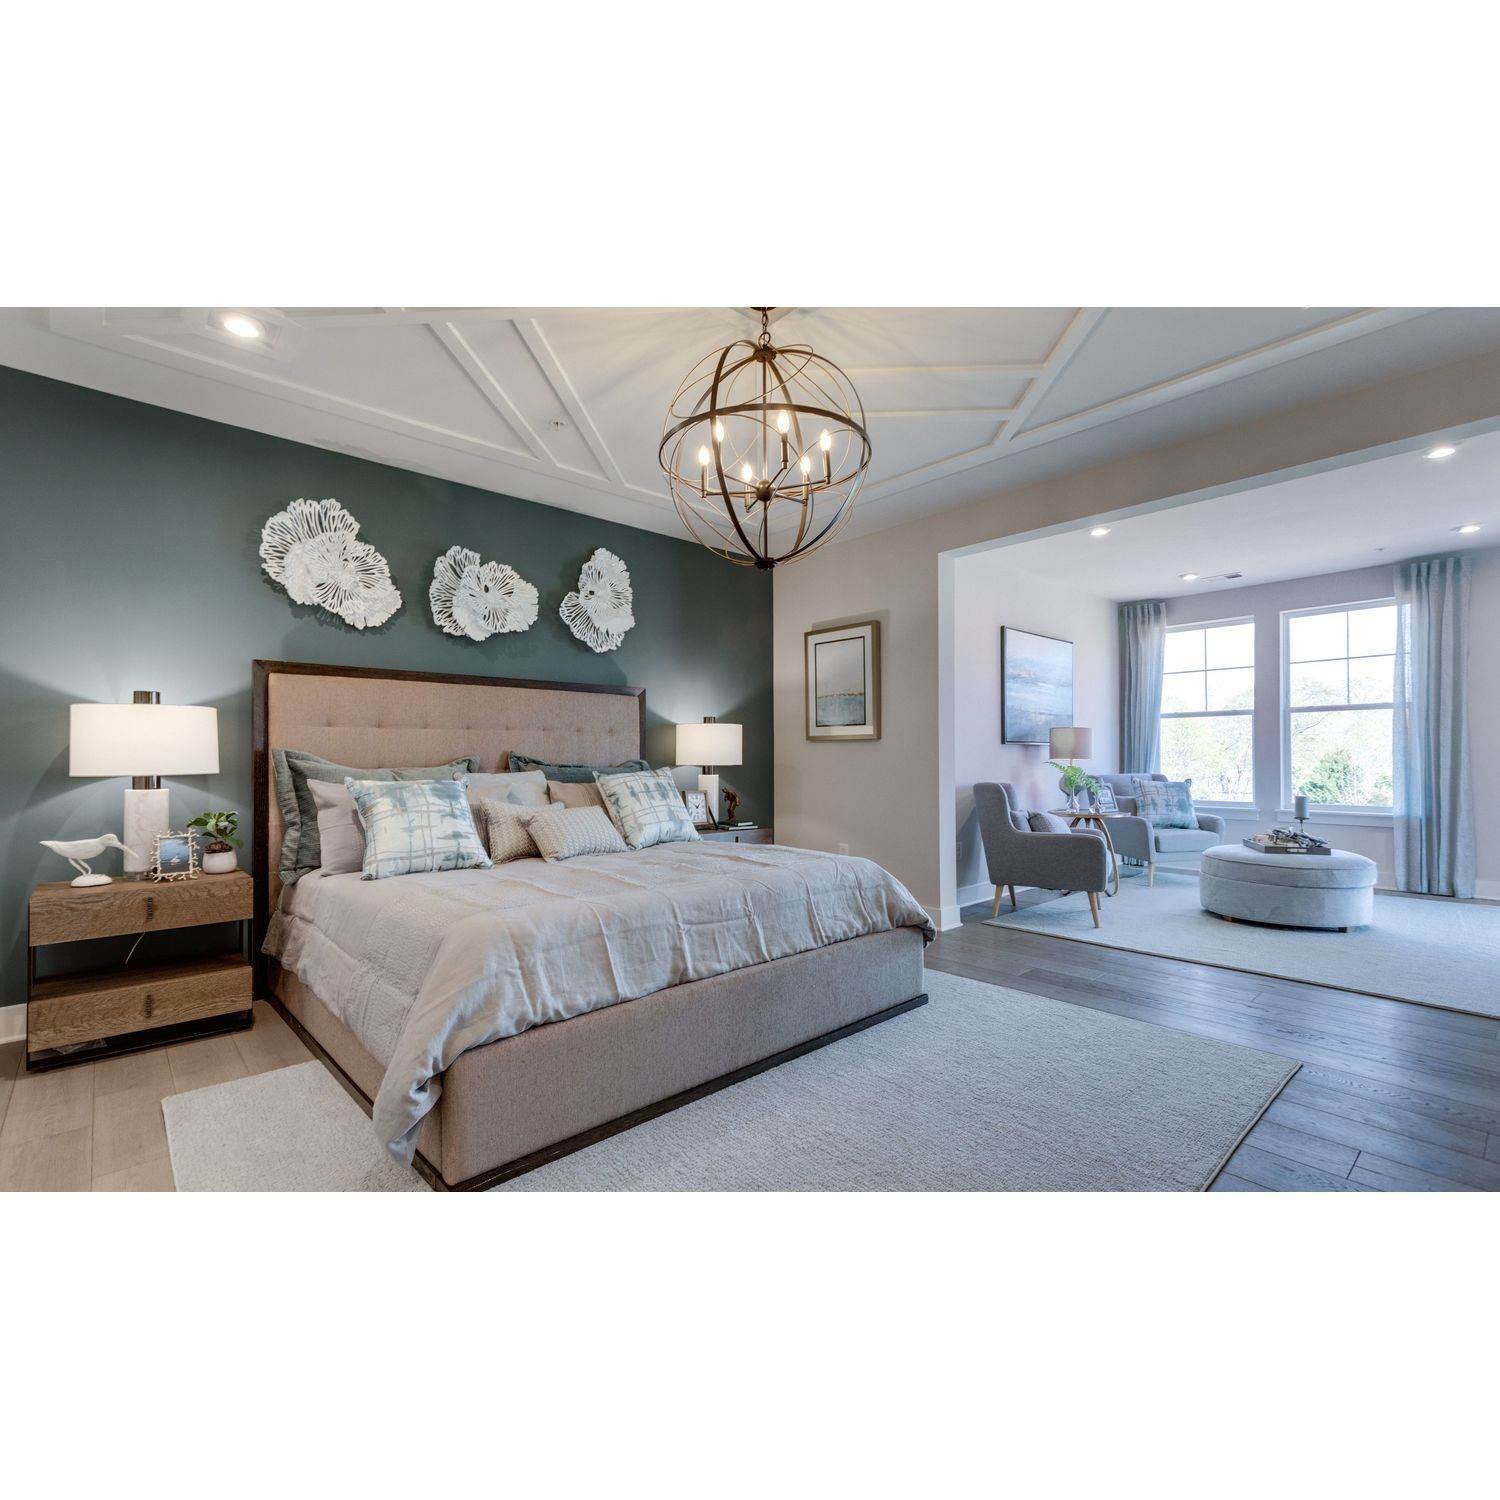 4. 131 Flycatcher Way, Chester, MD 21619에 K. Hovnanian’s® Four Seasons at Kent Island - Luxury Condos 건물